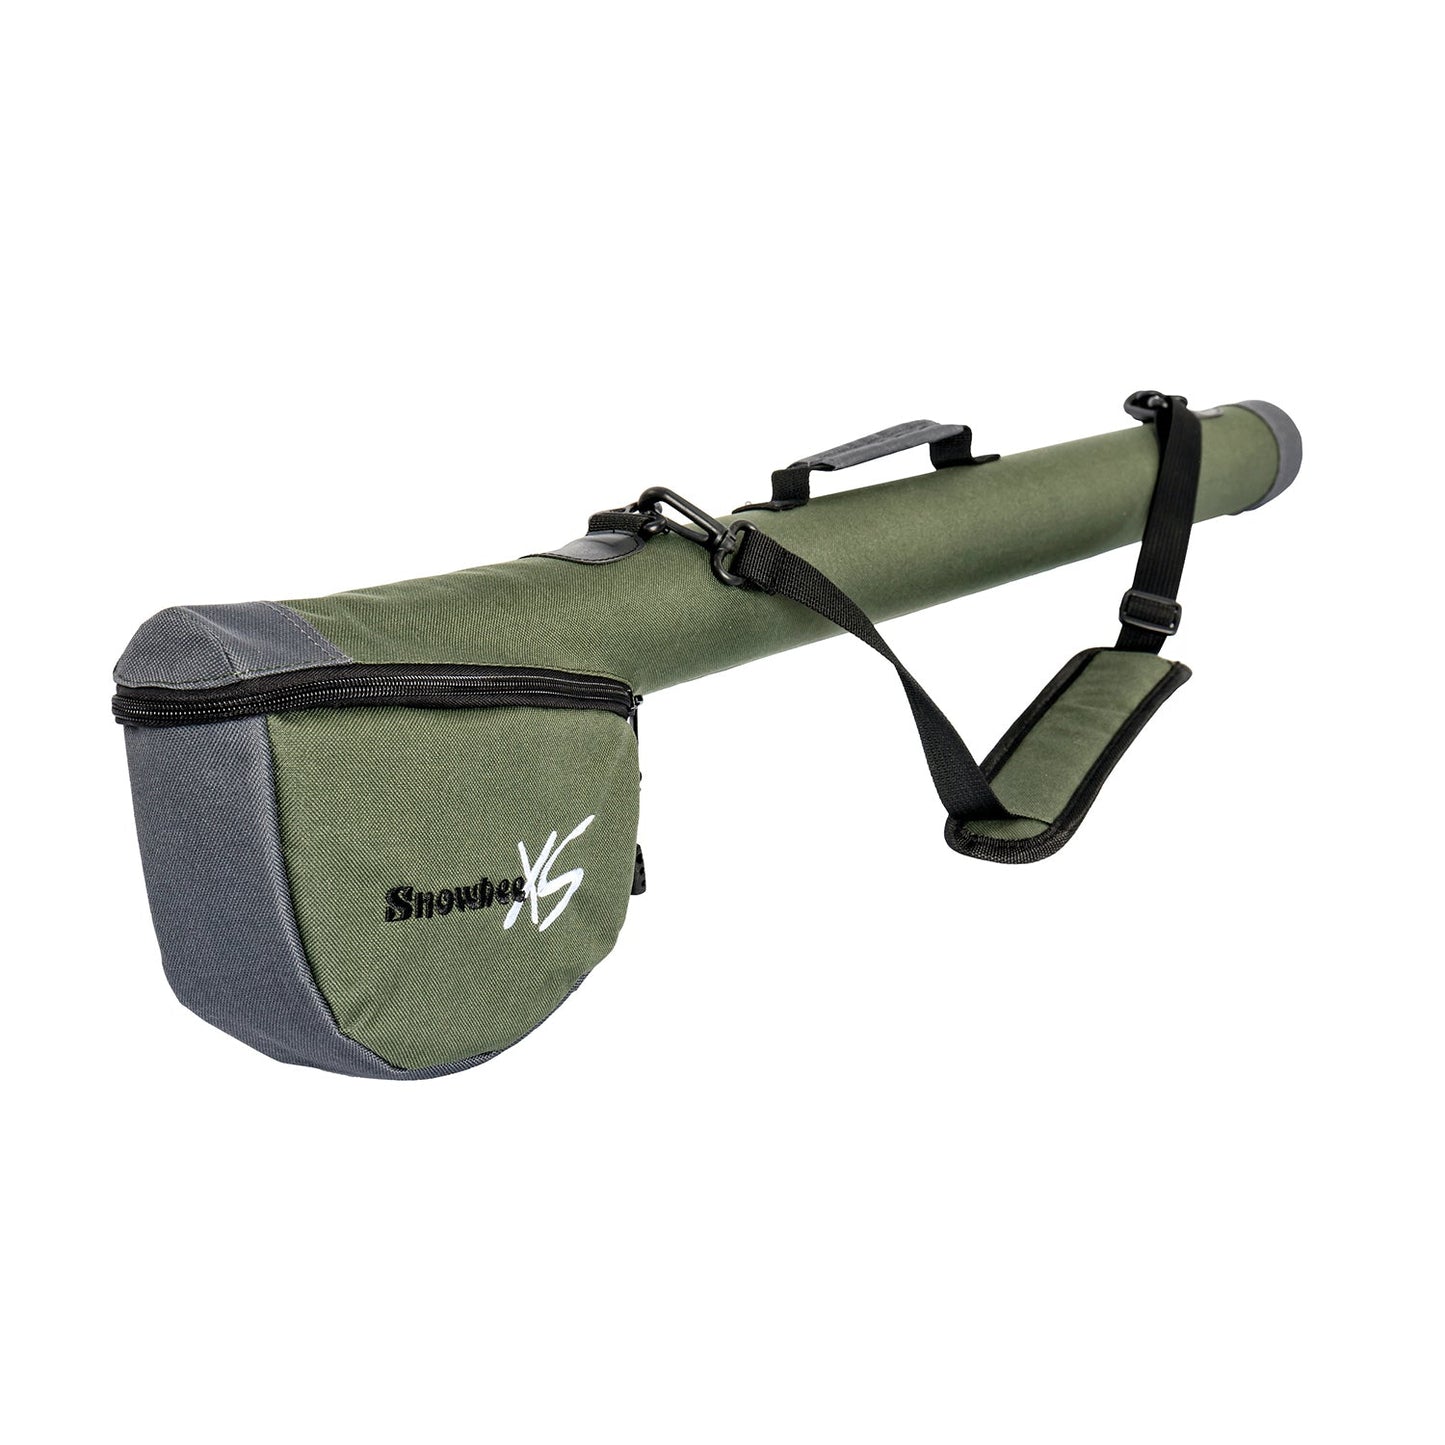 XS Travel Fly Rod/Reel Cases by Snowbee USA